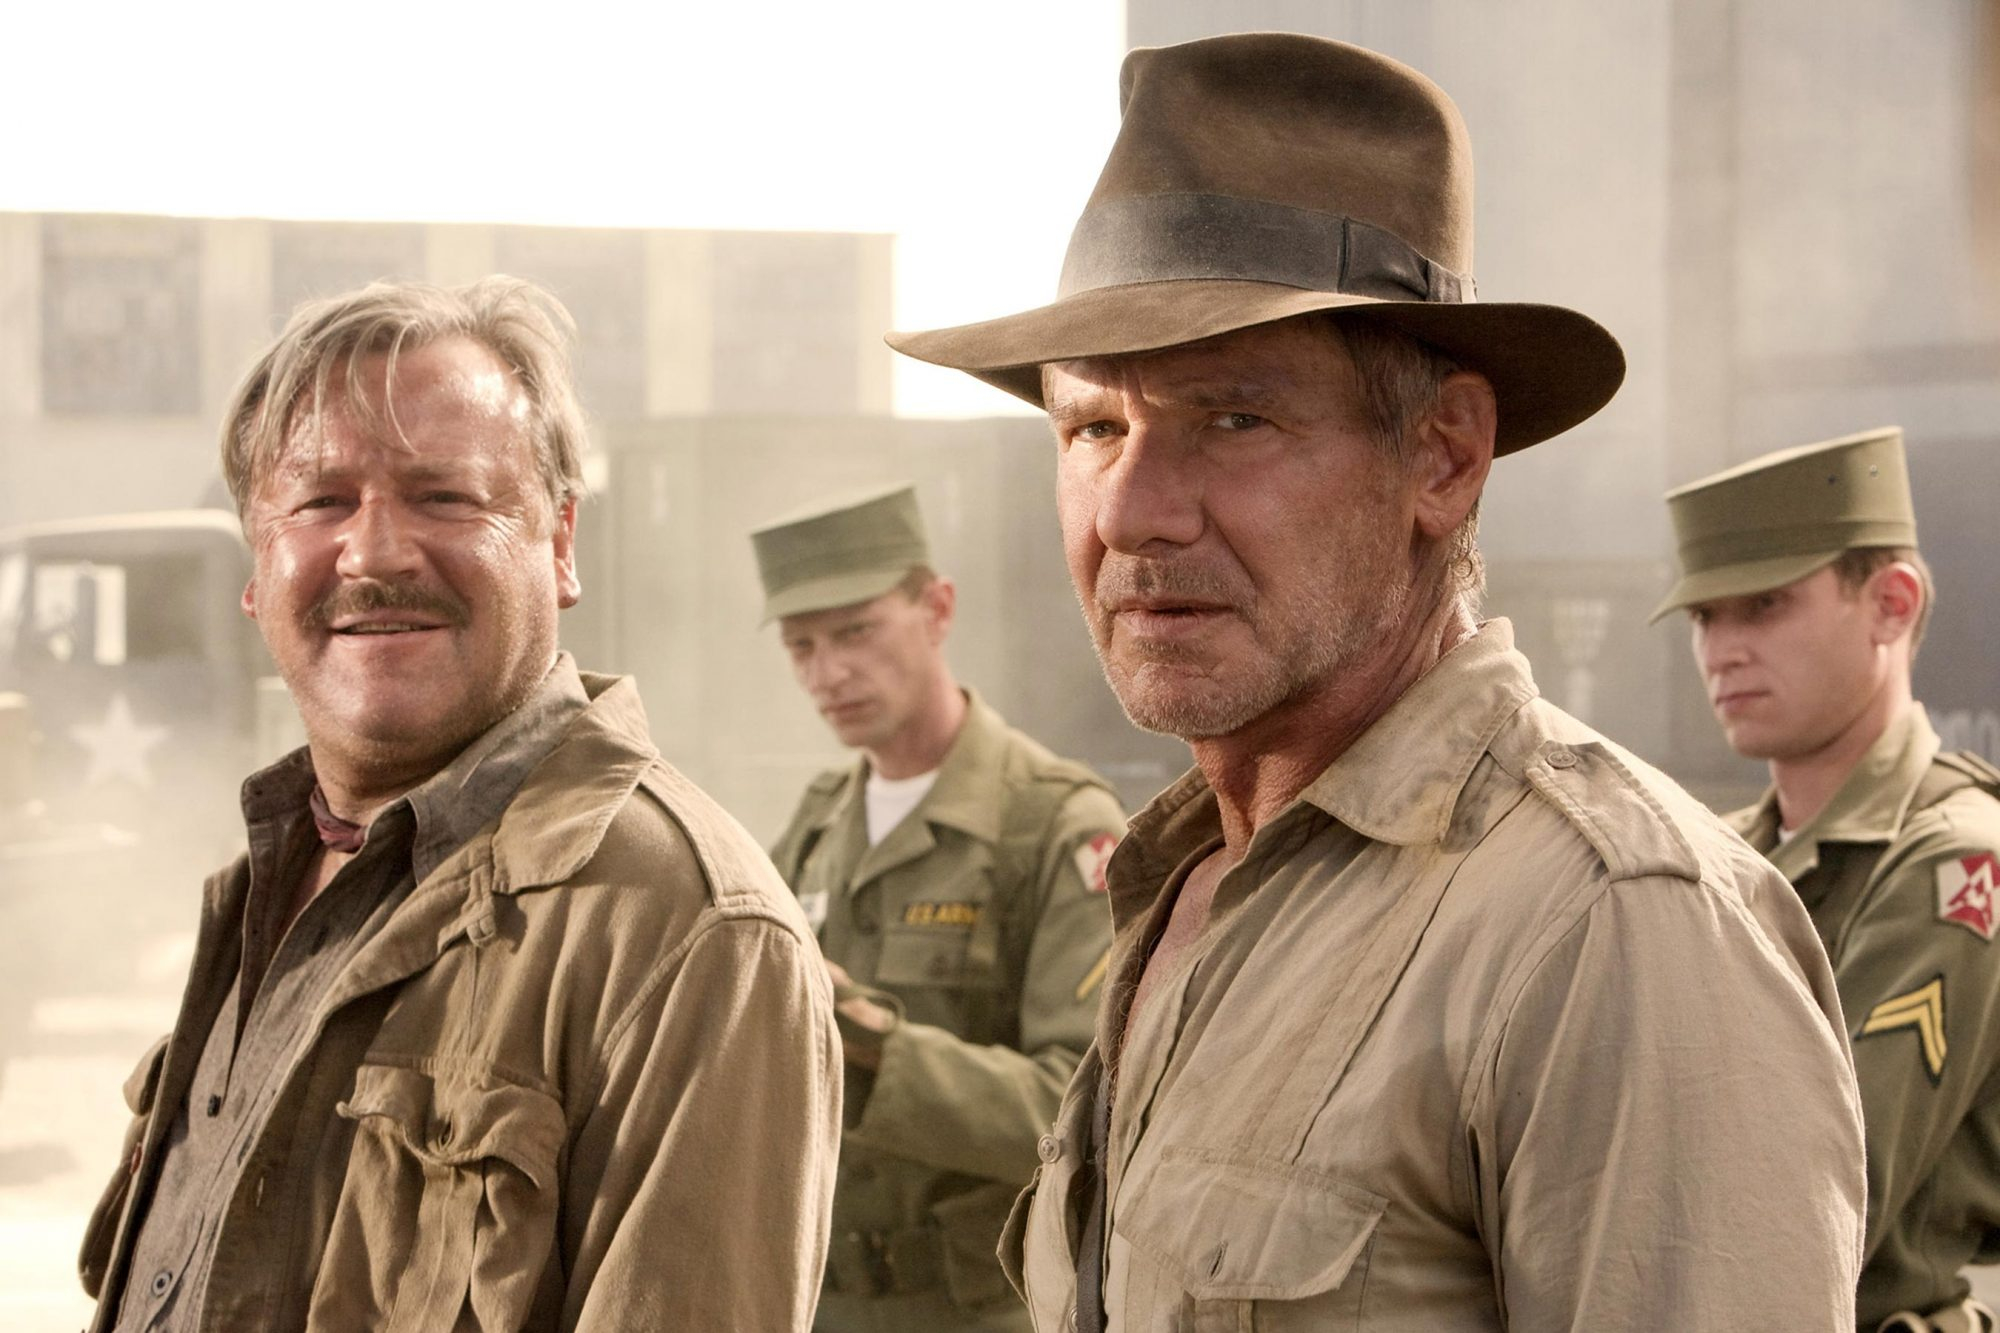 Is Indiana Jones and the Kingdom of the Crystal Skull really that bad?